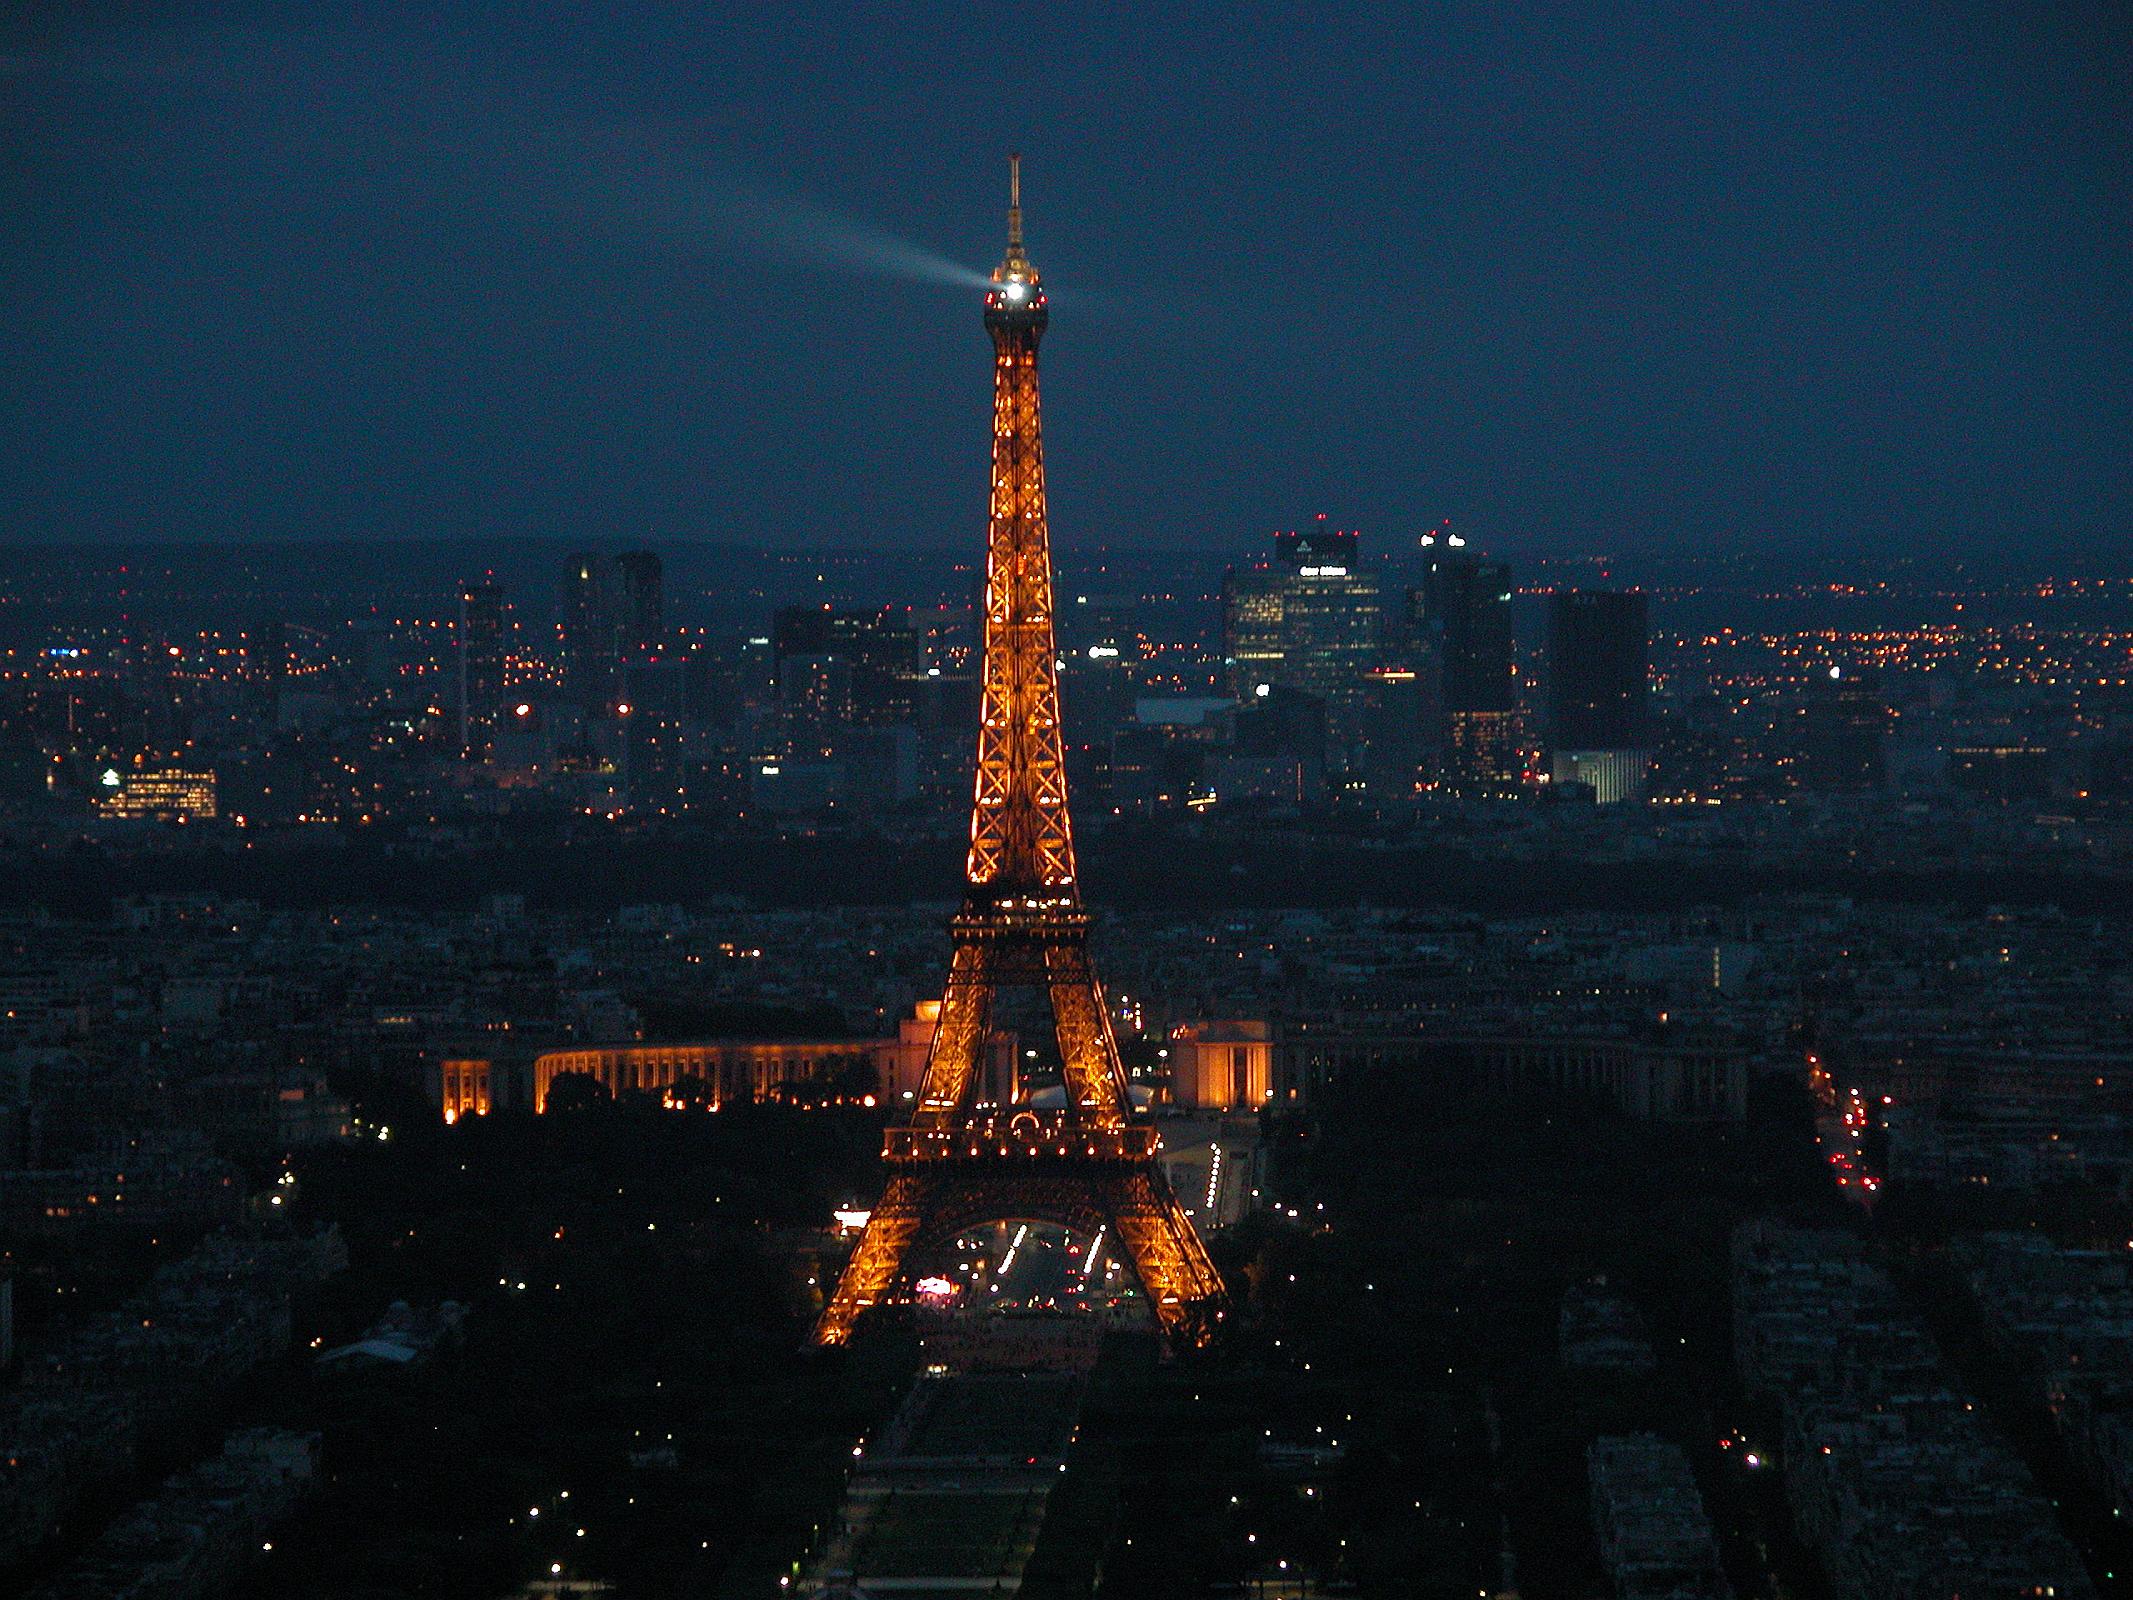 Paris 09 Evening Lights On Eiffel Tower With La Defense Behind From Montparnasse Tower 